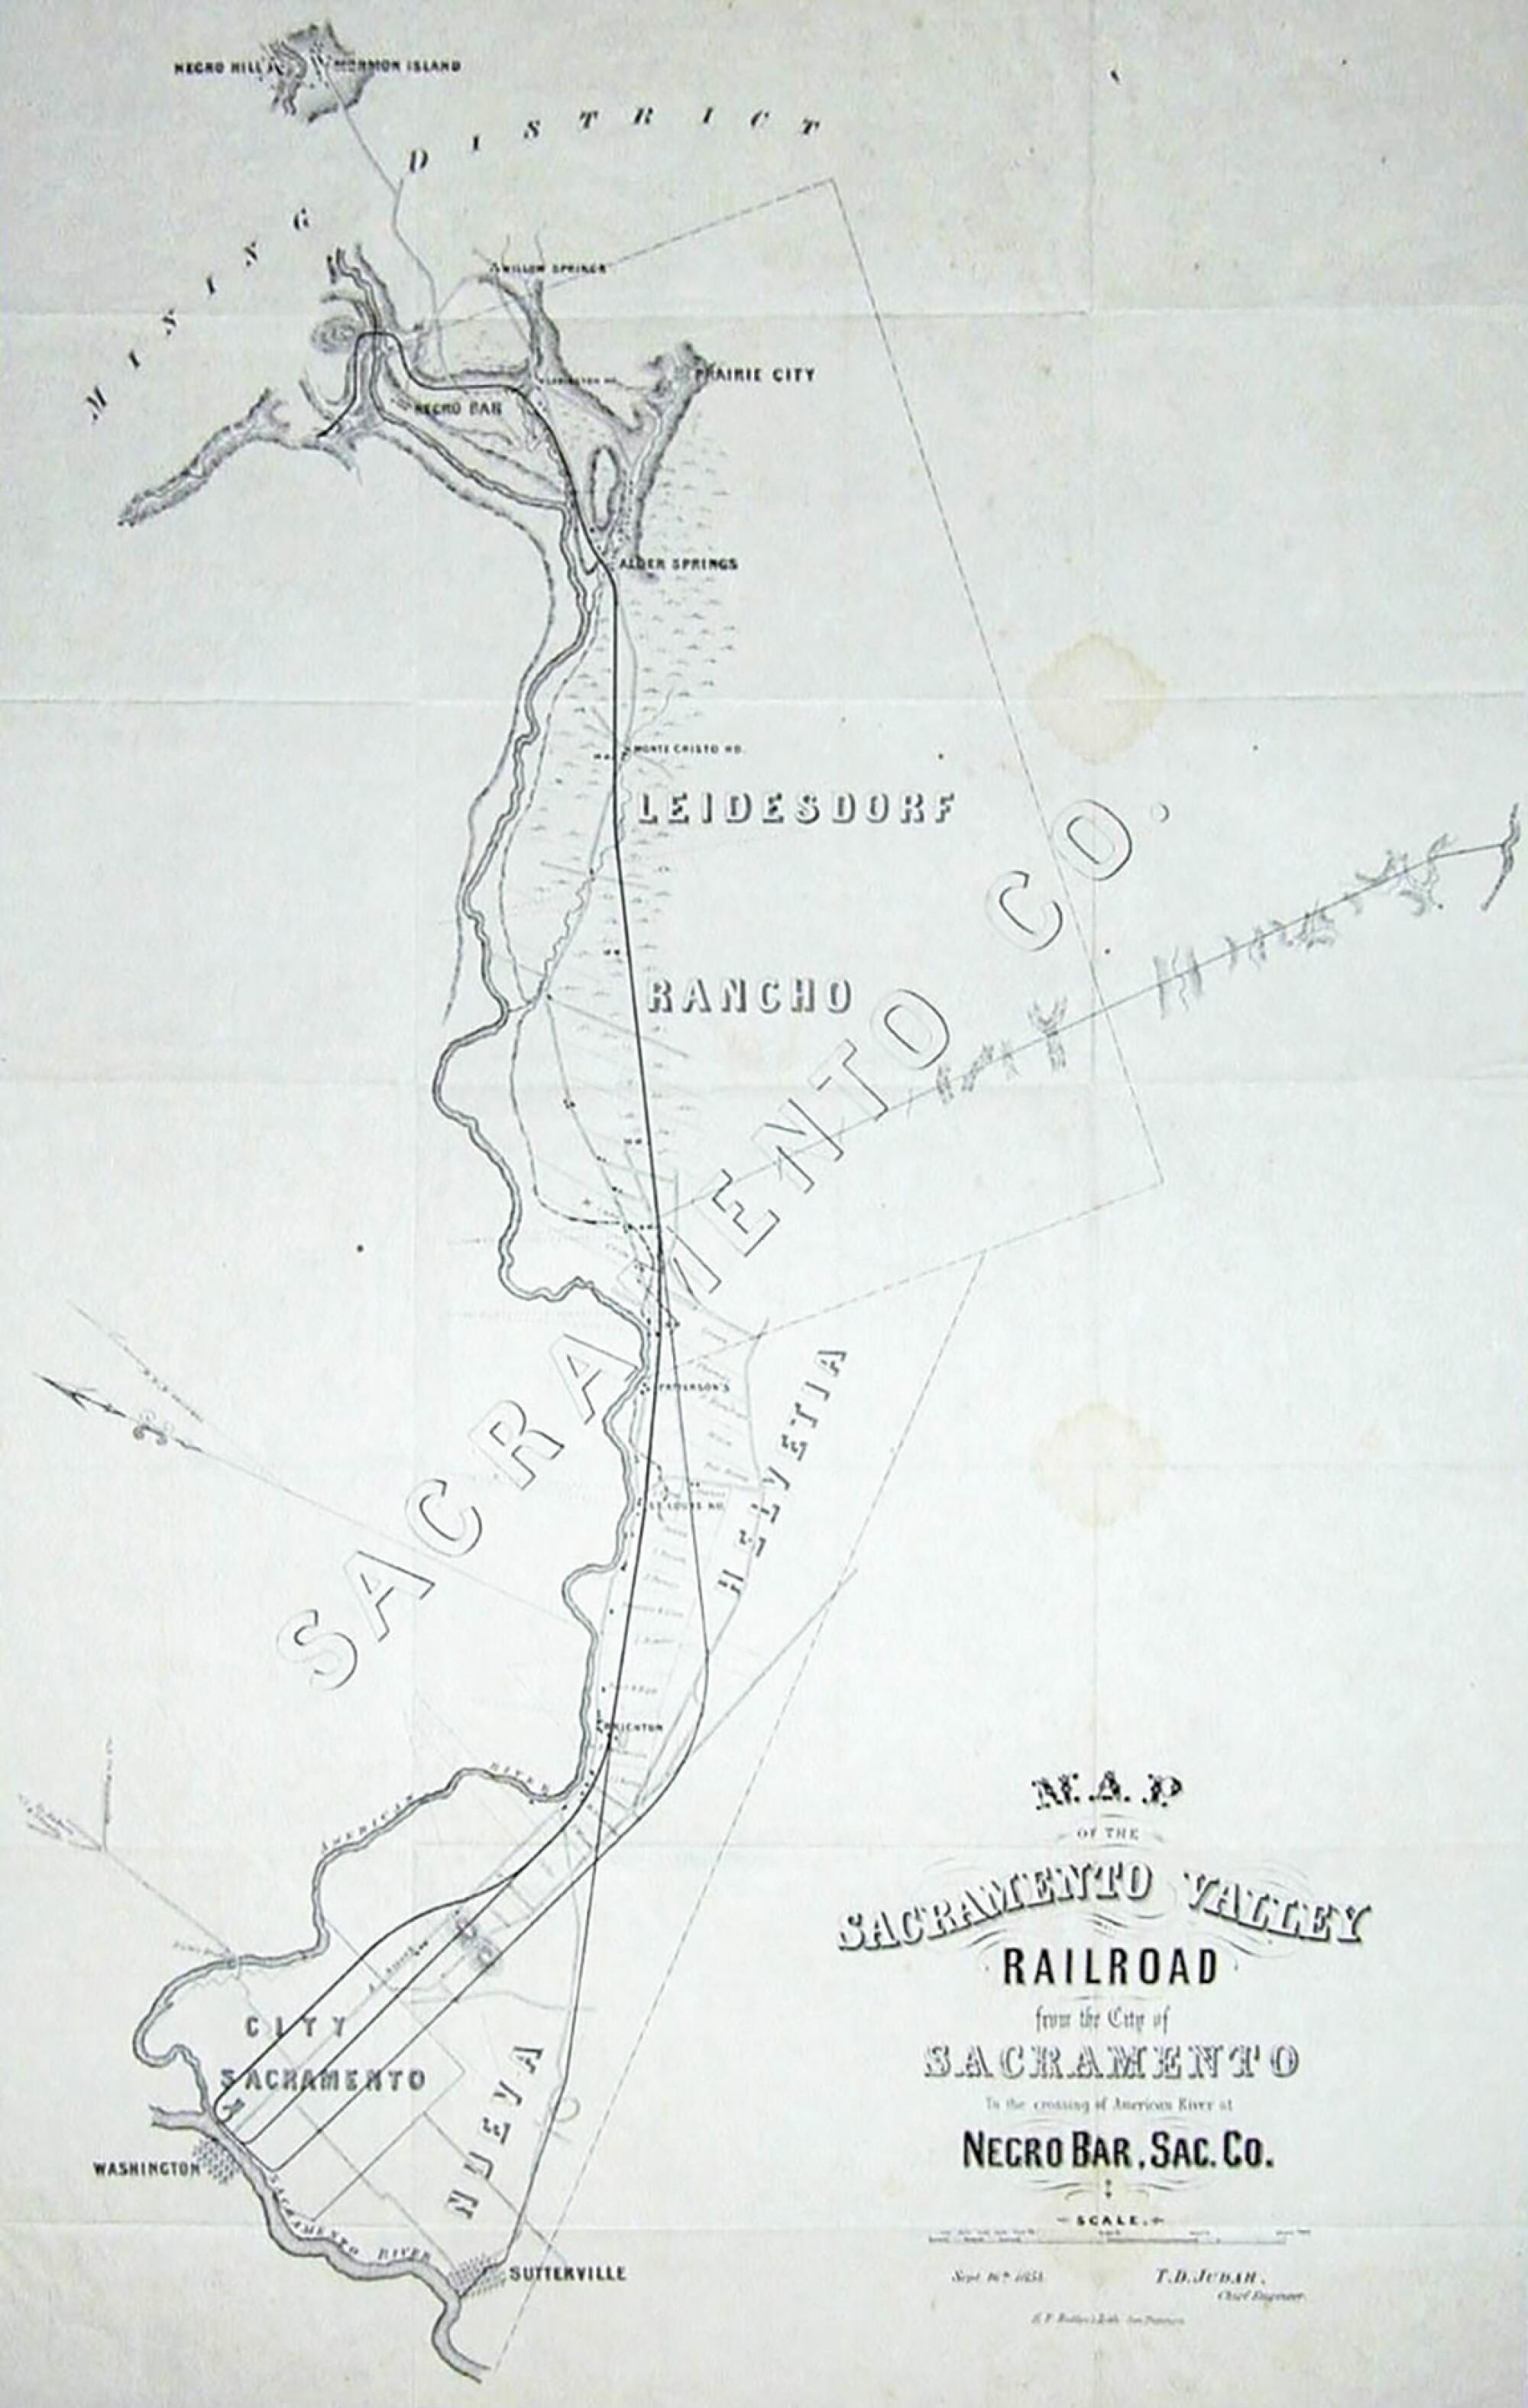 A vintage 19th century map depicts a railroad route through what was then the tiny settlement of Sacramento